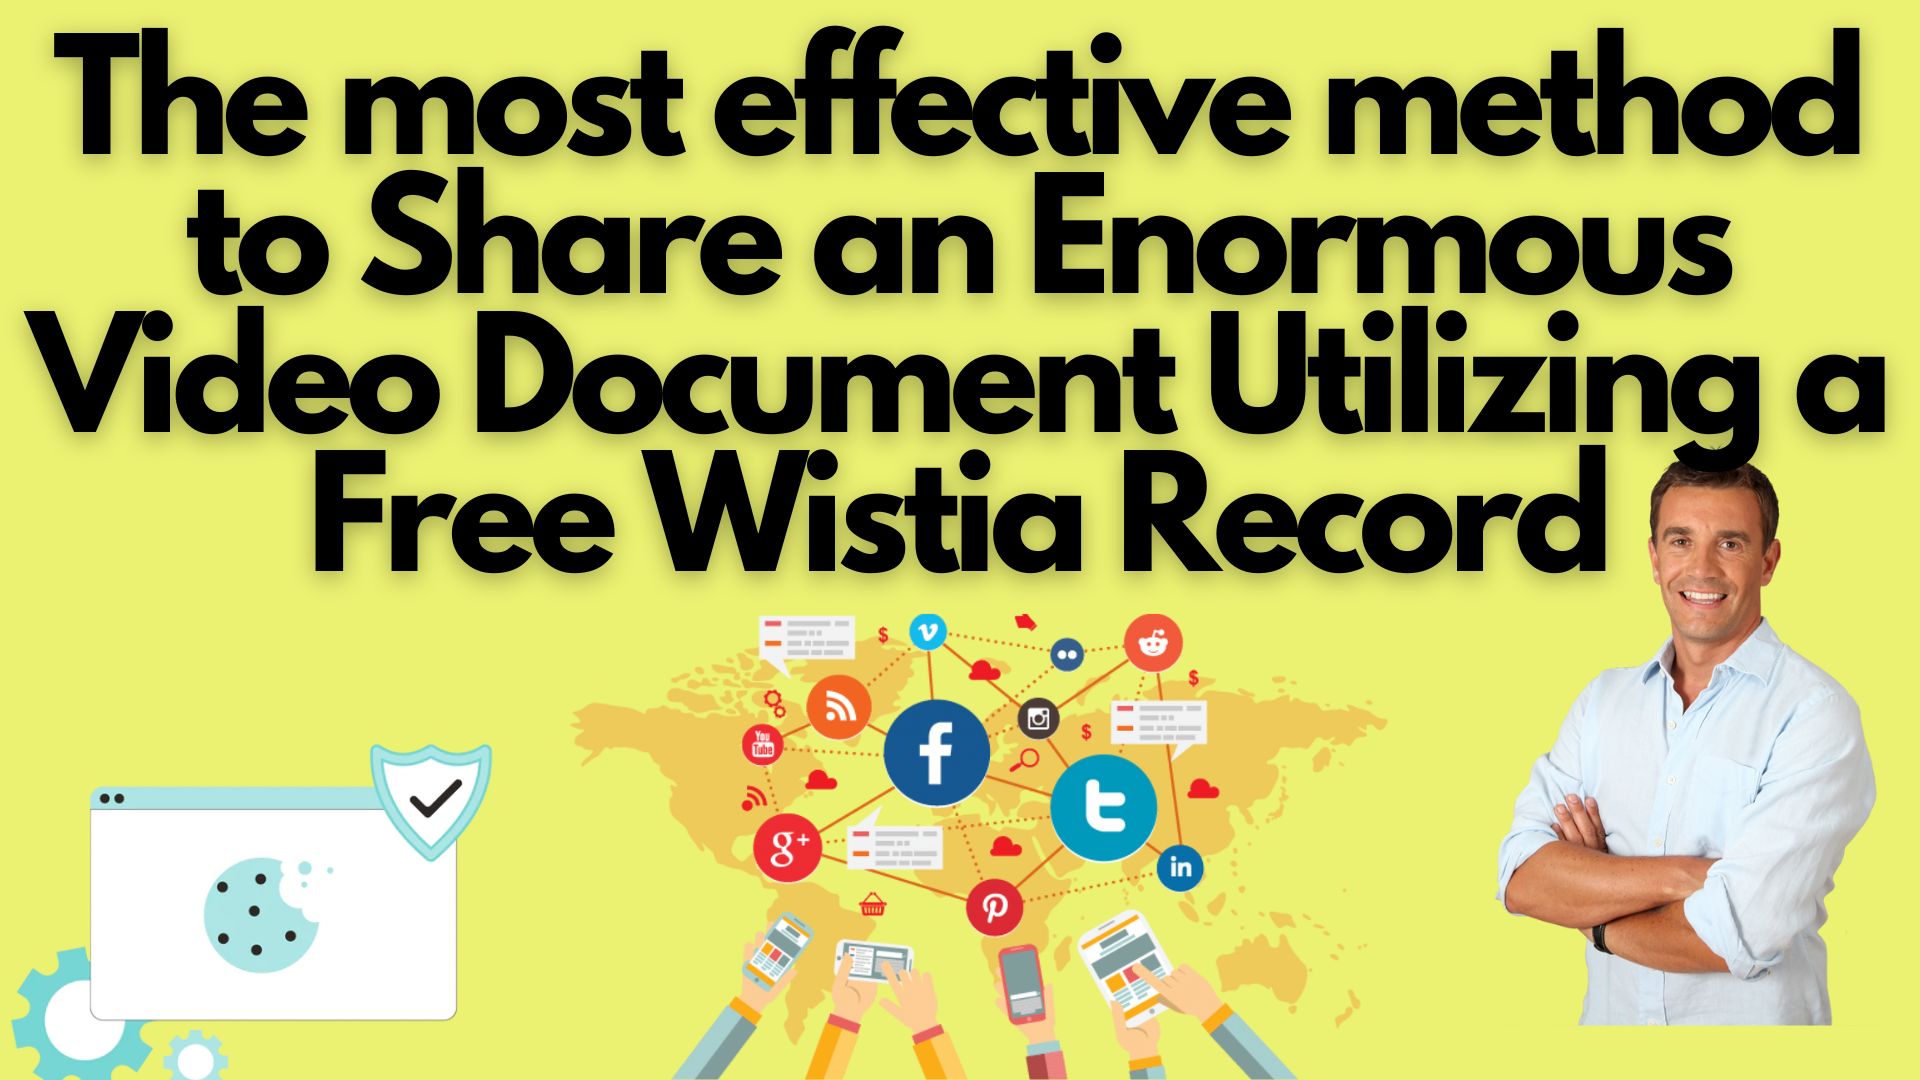 The most effective method to Share an Enormous Video Document Utilizing a Free Wistia Record